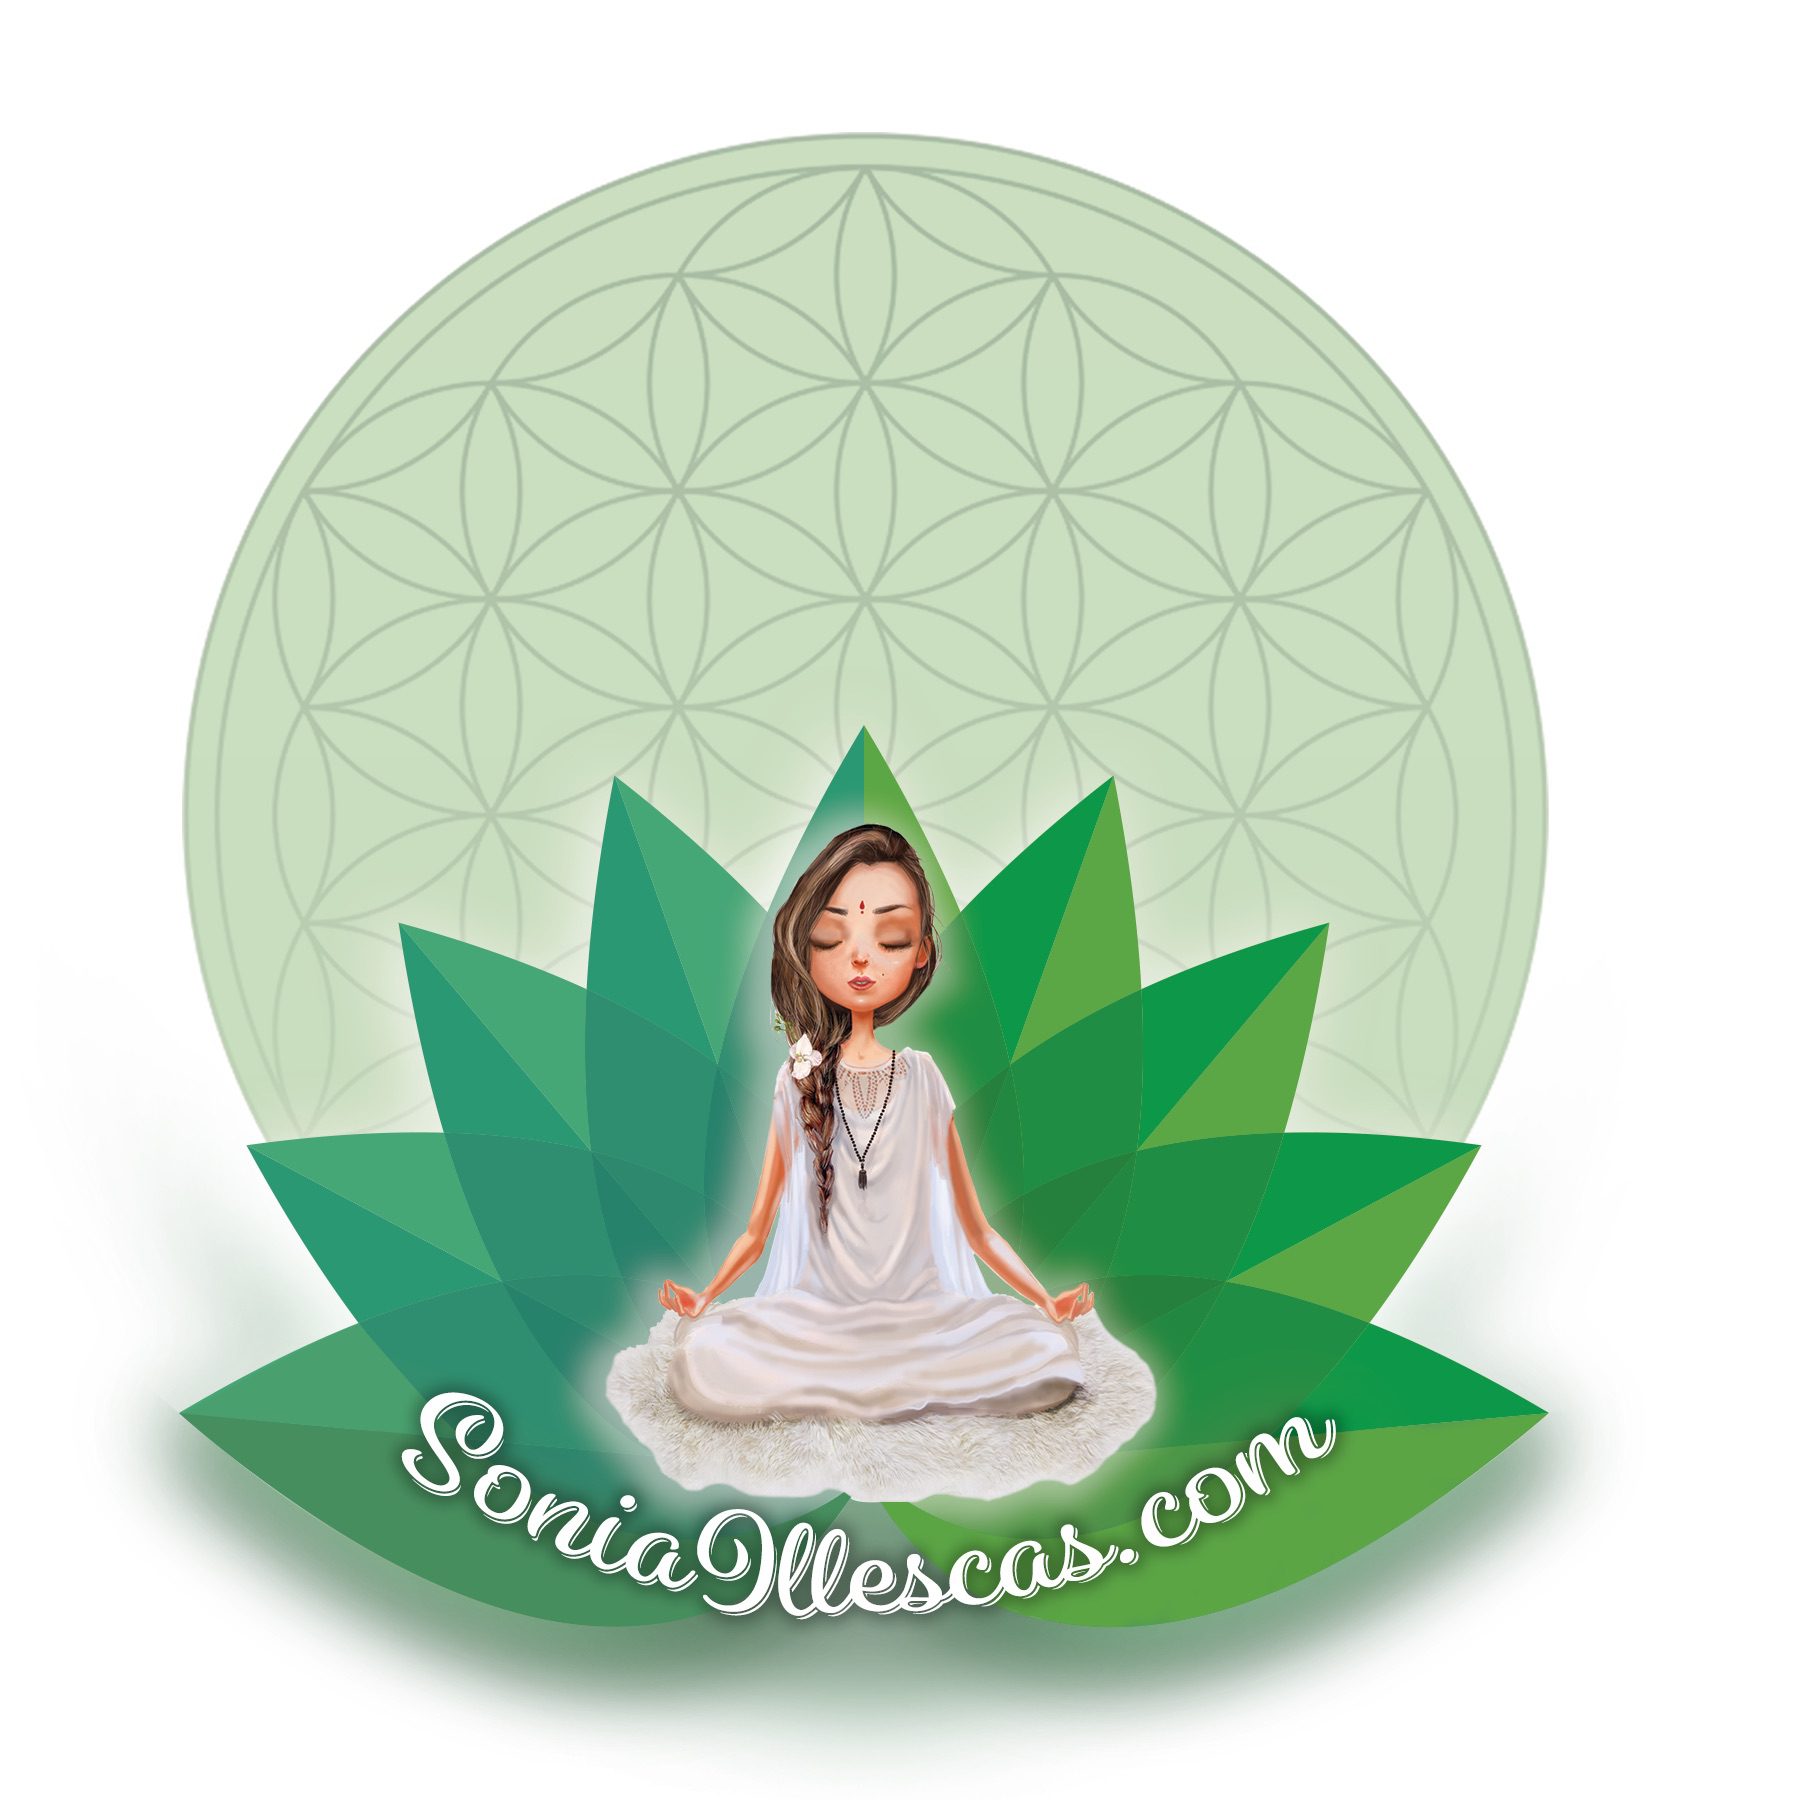 A woman sitting in the lotus position on top of a green leaf.